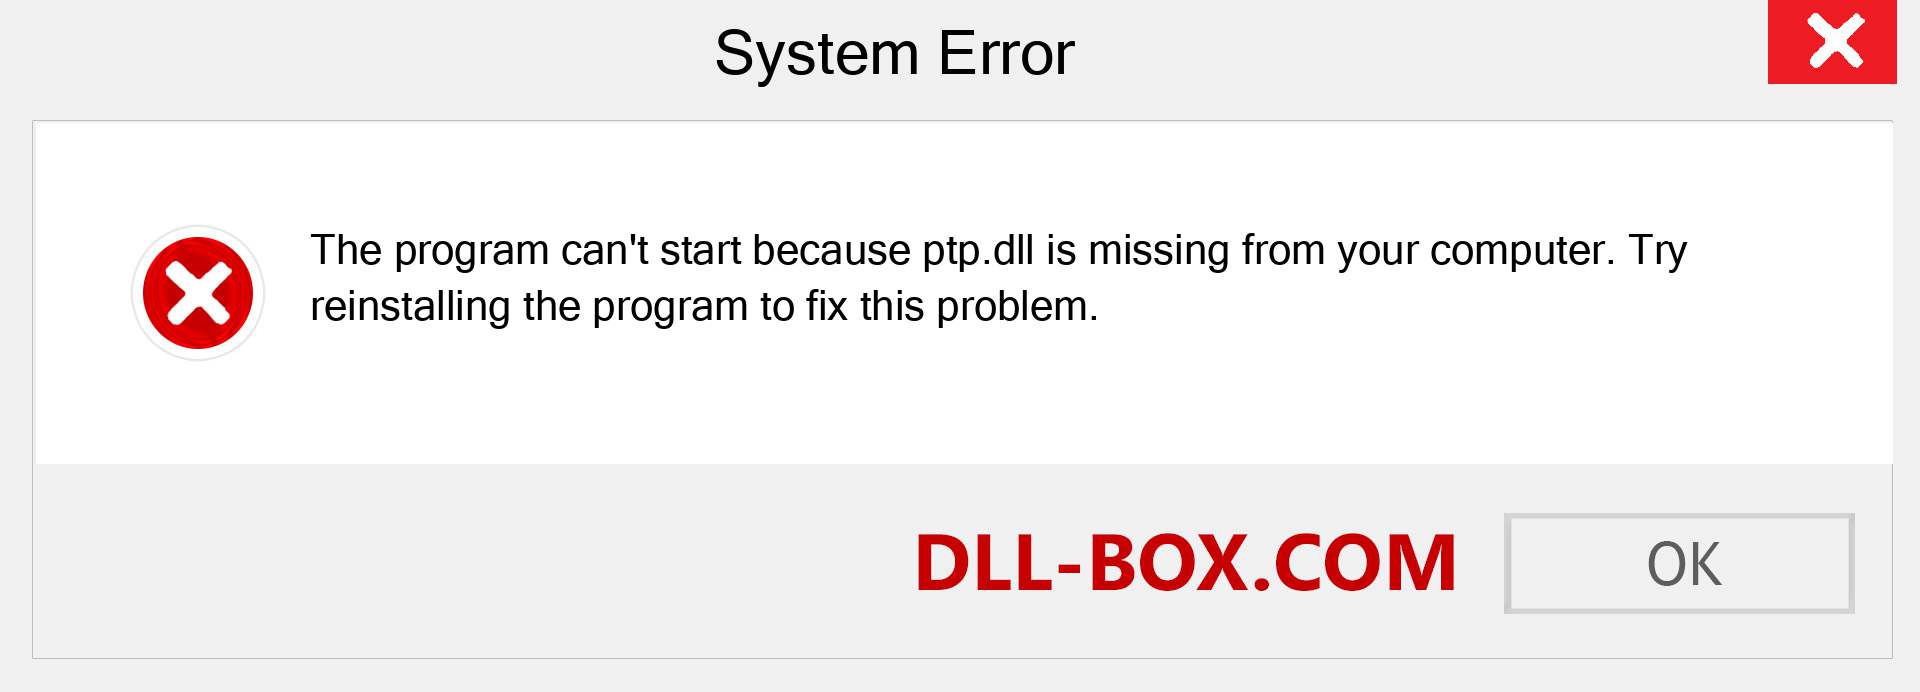  ptp.dll file is missing?. Download for Windows 7, 8, 10 - Fix  ptp dll Missing Error on Windows, photos, images